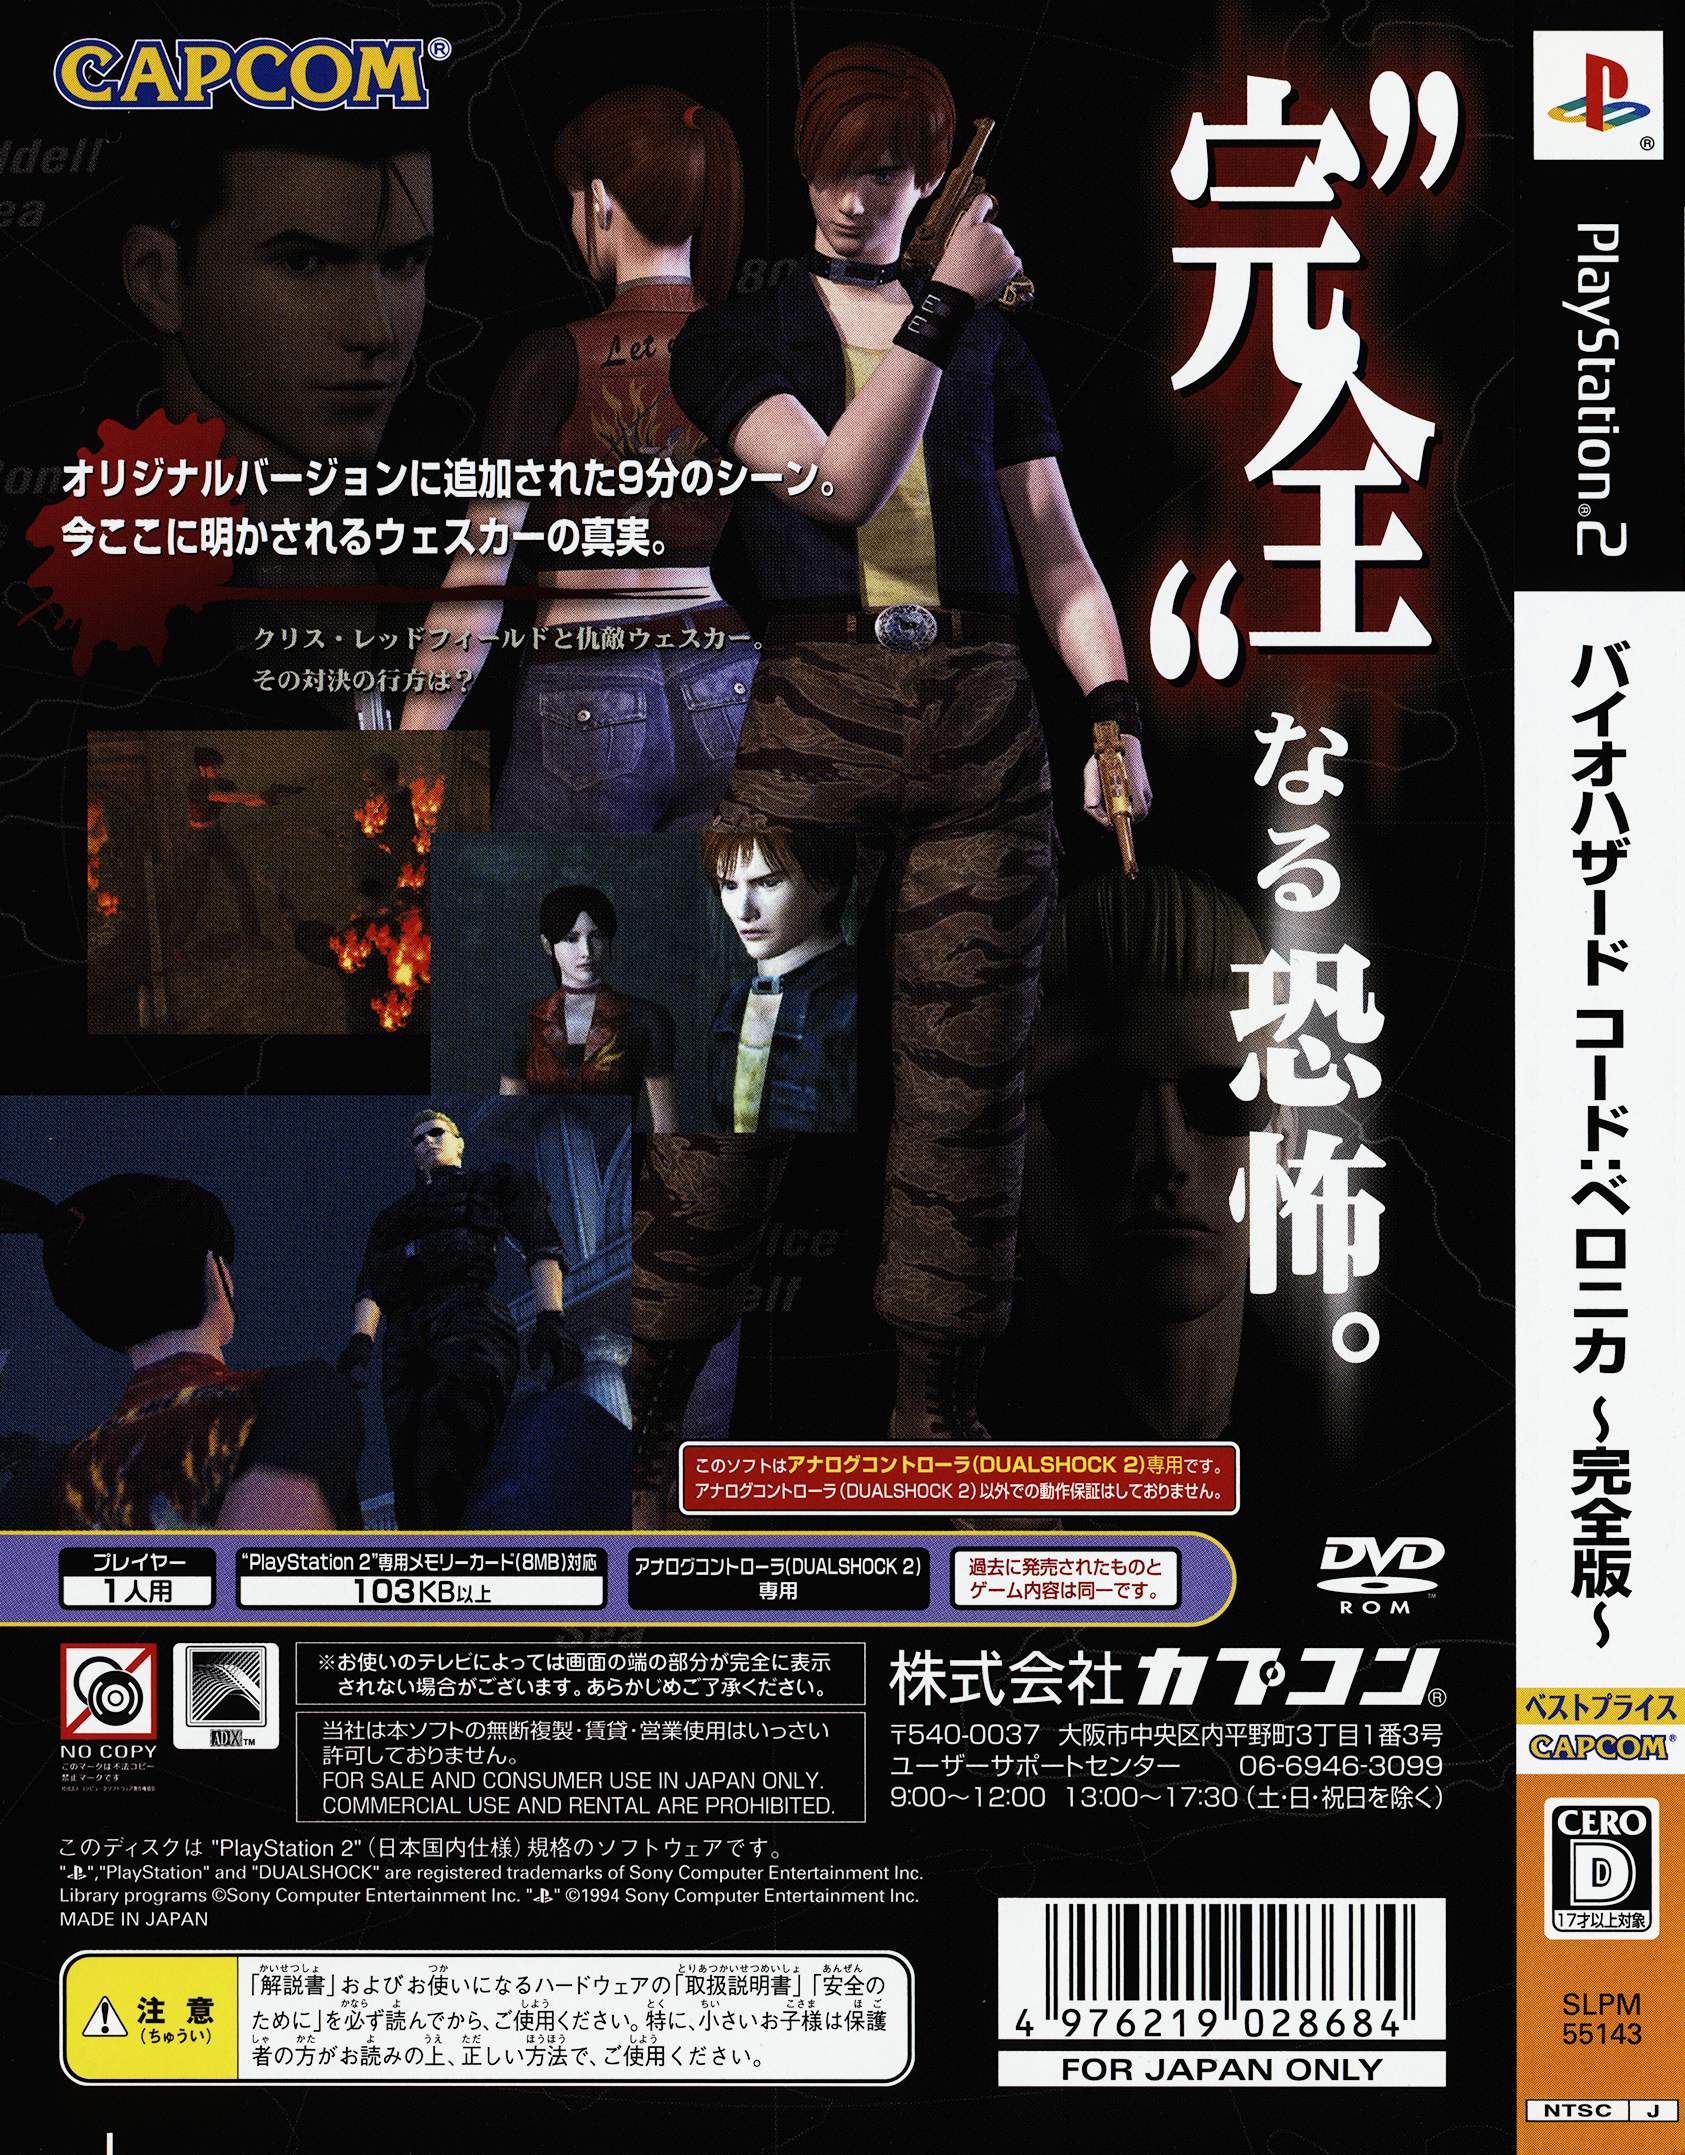 Resident Evil - Code - Veronica X [SLUS-20184] (Sony Playstation 2) - Box  Scans (1200DPI) : Capcom : Free Download, Borrow, and Streaming : Internet  Archive